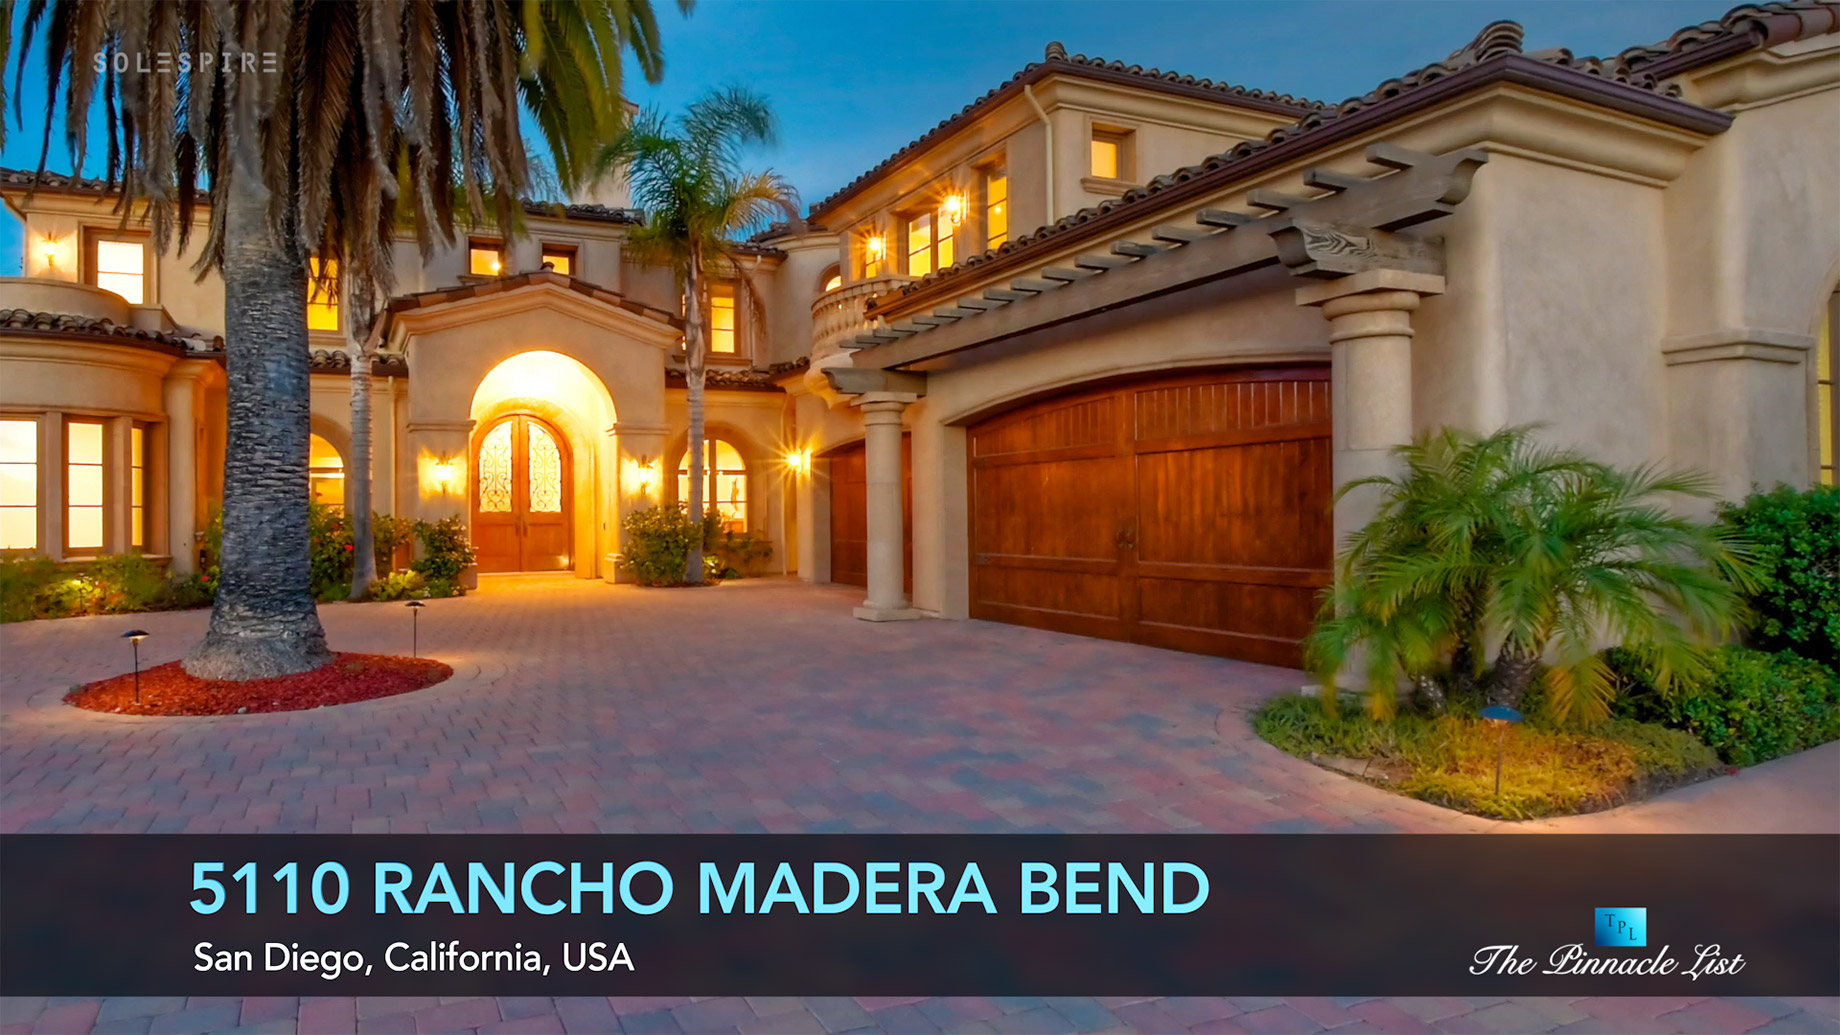 5110 Rancho Madera Bend, San Diego, CA, USA - Luxury Real Estate - Video